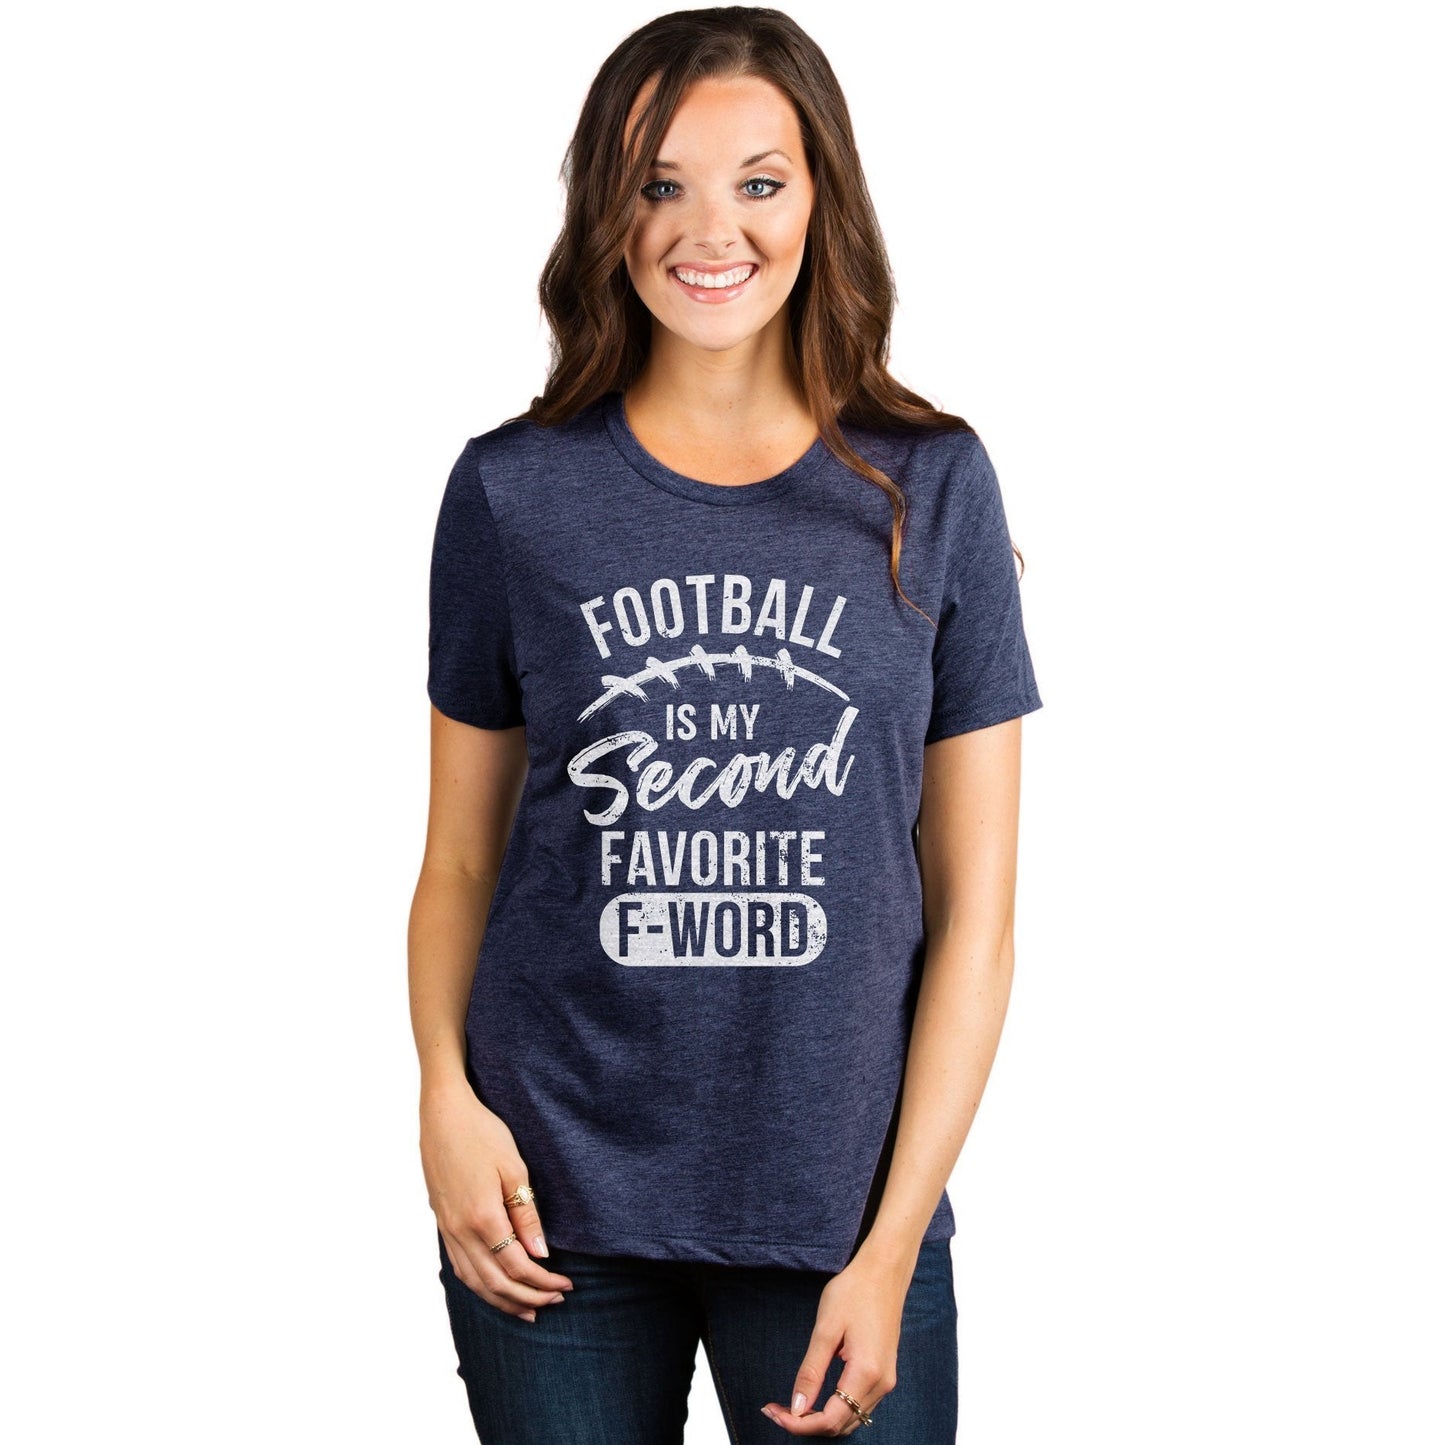 Football Is My Second Favorite F Word Women's Relaxed Crewneck T-Shirt Top Tee Heather Navy Model
